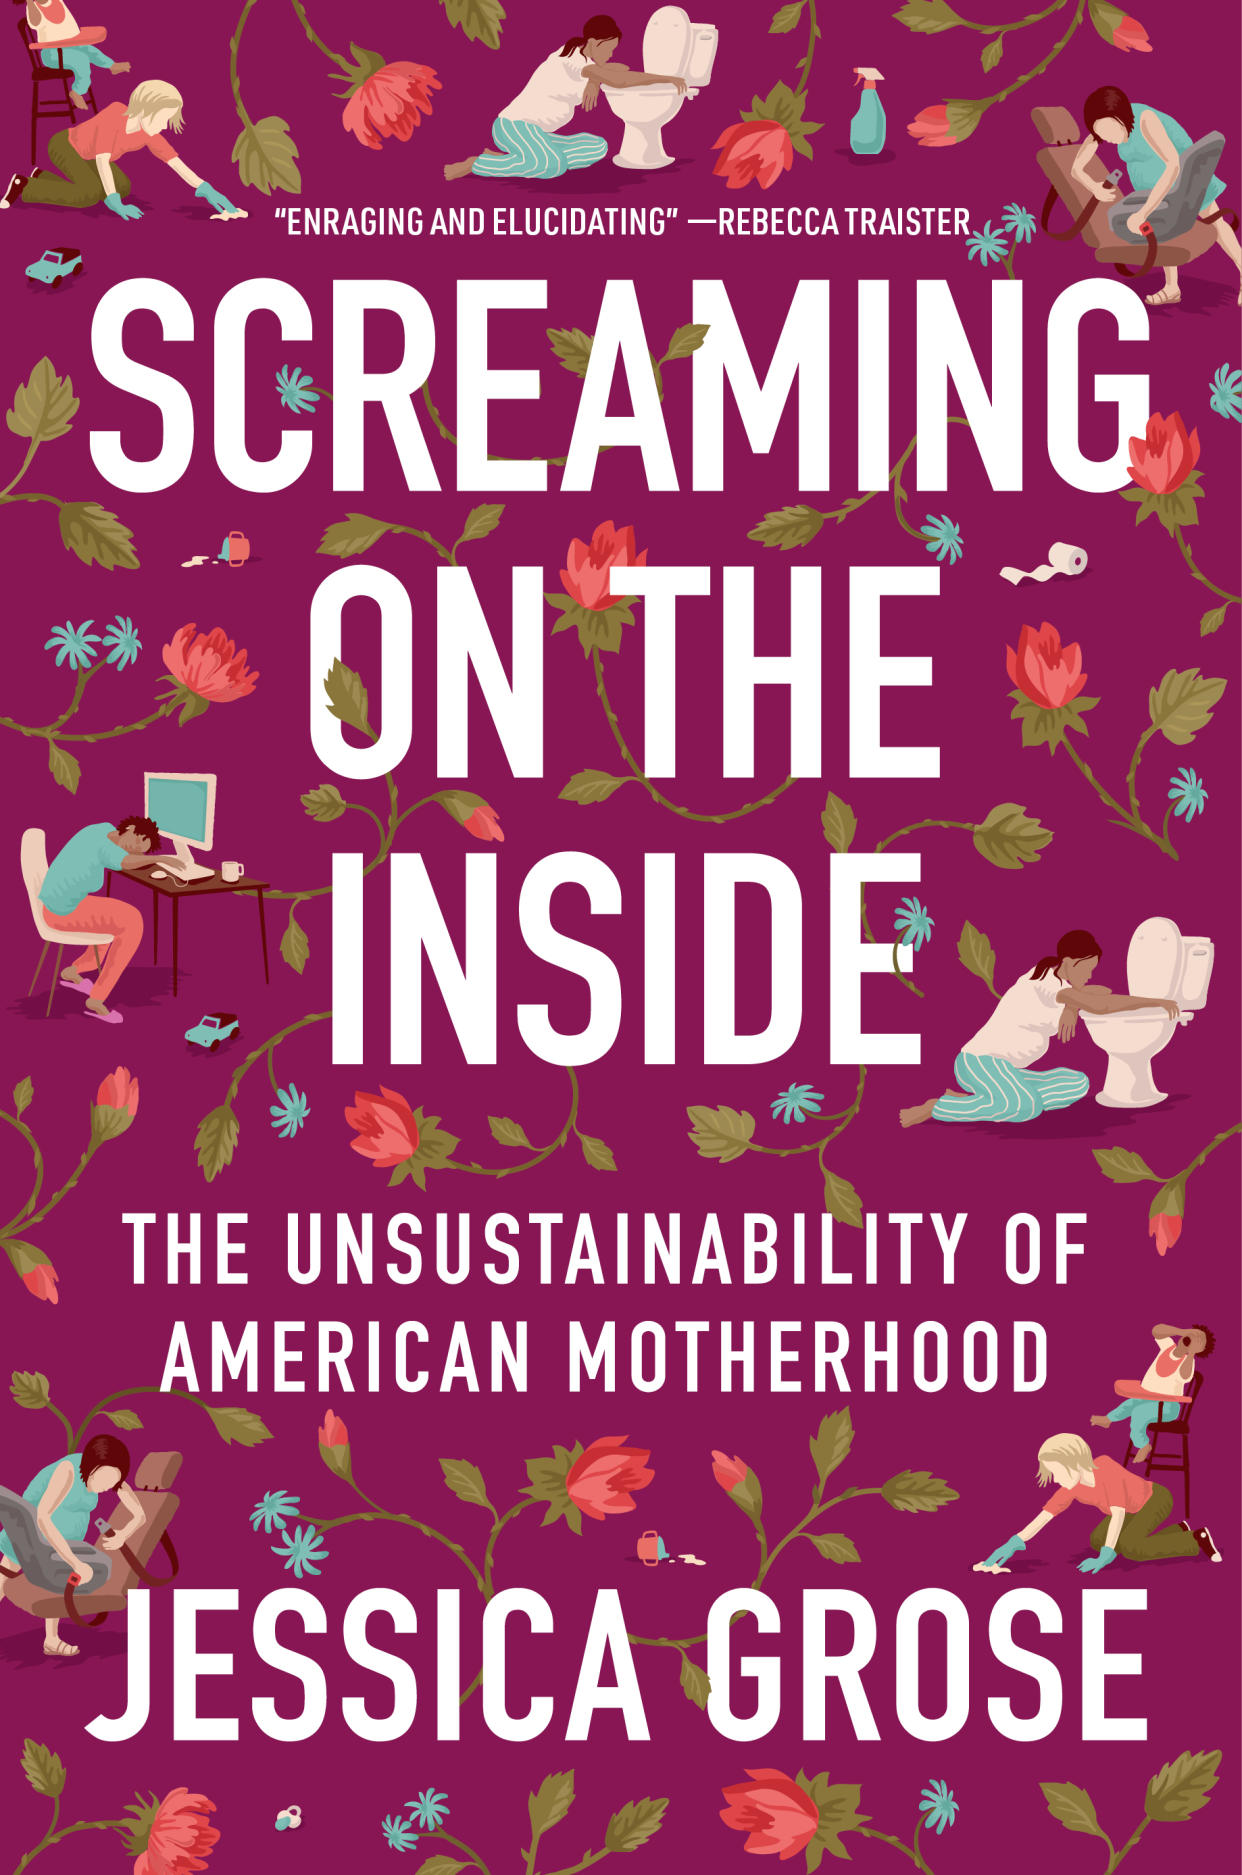 Grose writes about the nuances and challenges of American motherhood in her new book, Screaming on the Inside. (Image: Courtesy of HarperCollins)